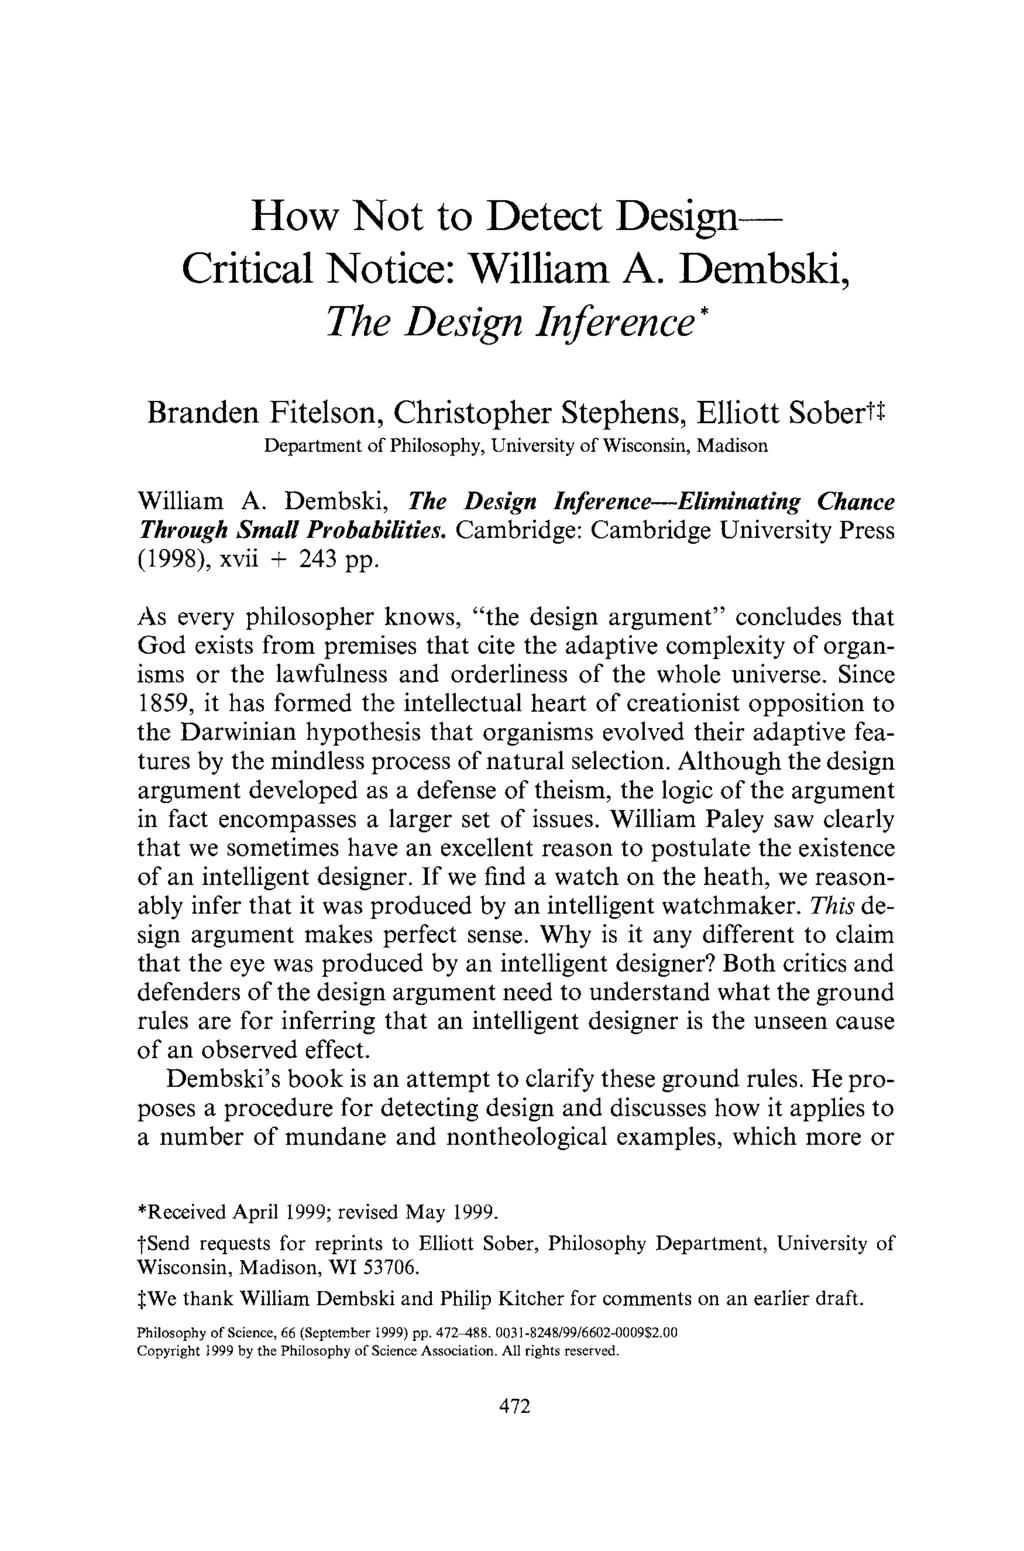 W.A. DEMBSKI, THE DESIGN INFERENCE 473 How Not to Detect Design Critical Notice: William A.